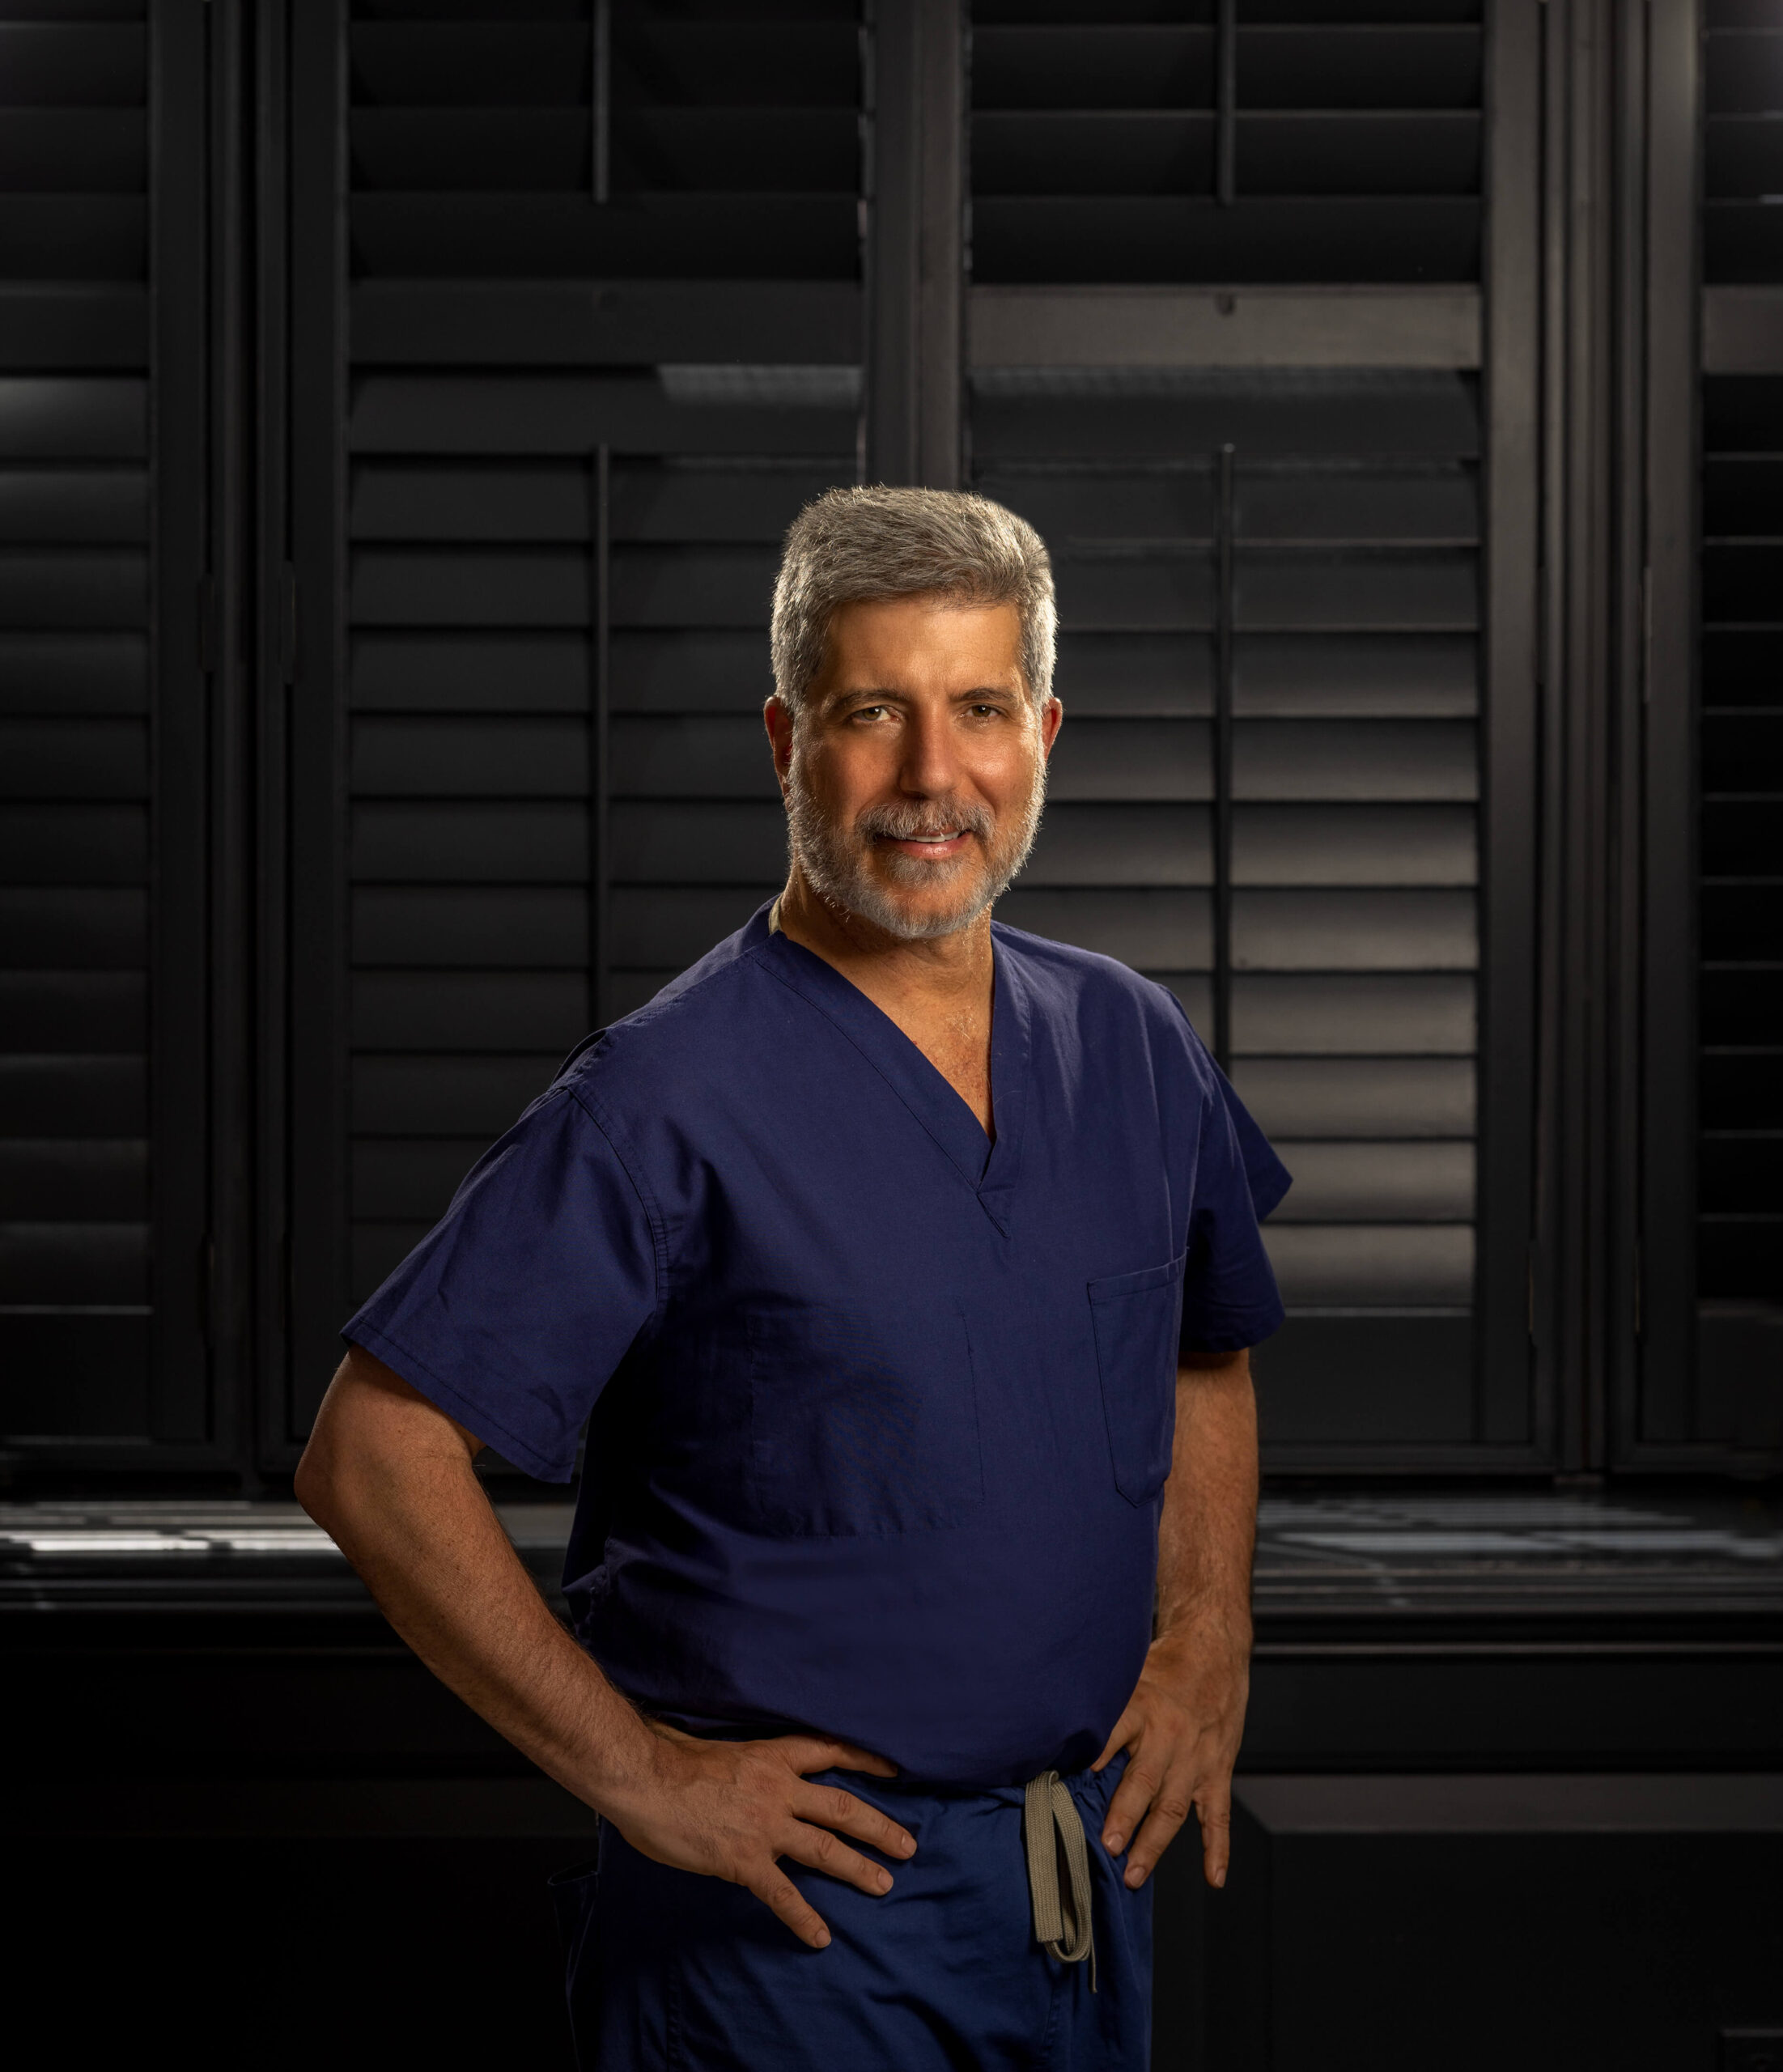 dr. alex vacarro in blue scrubs with hands on hips against black shutters